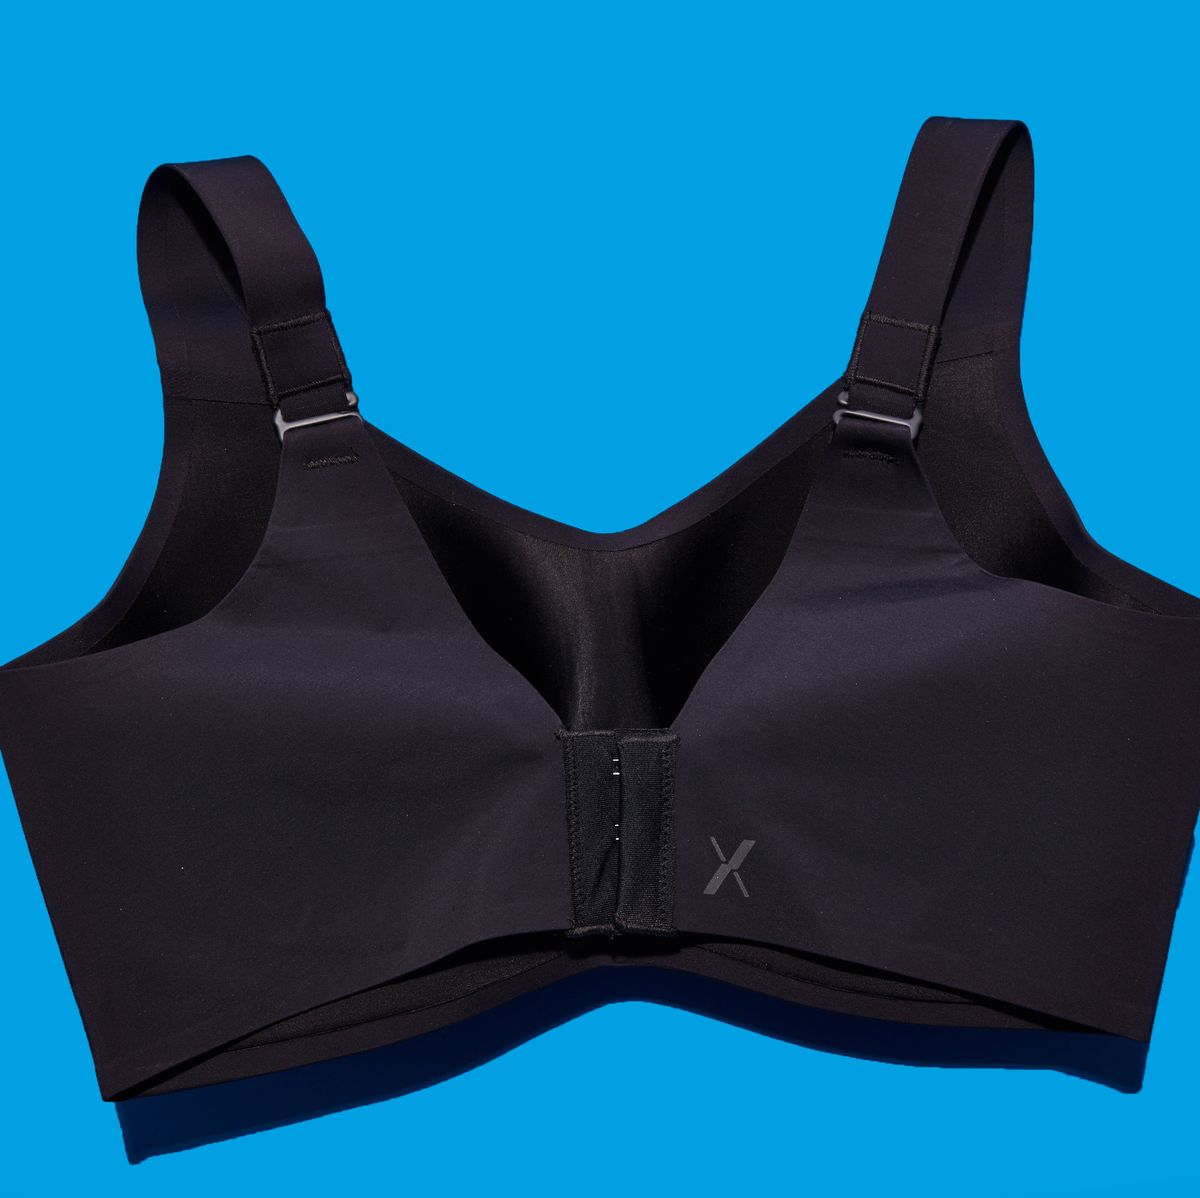 The Best Sports Bra for Runners with C to D Cups is the Brooks Dare Crossback  Bra